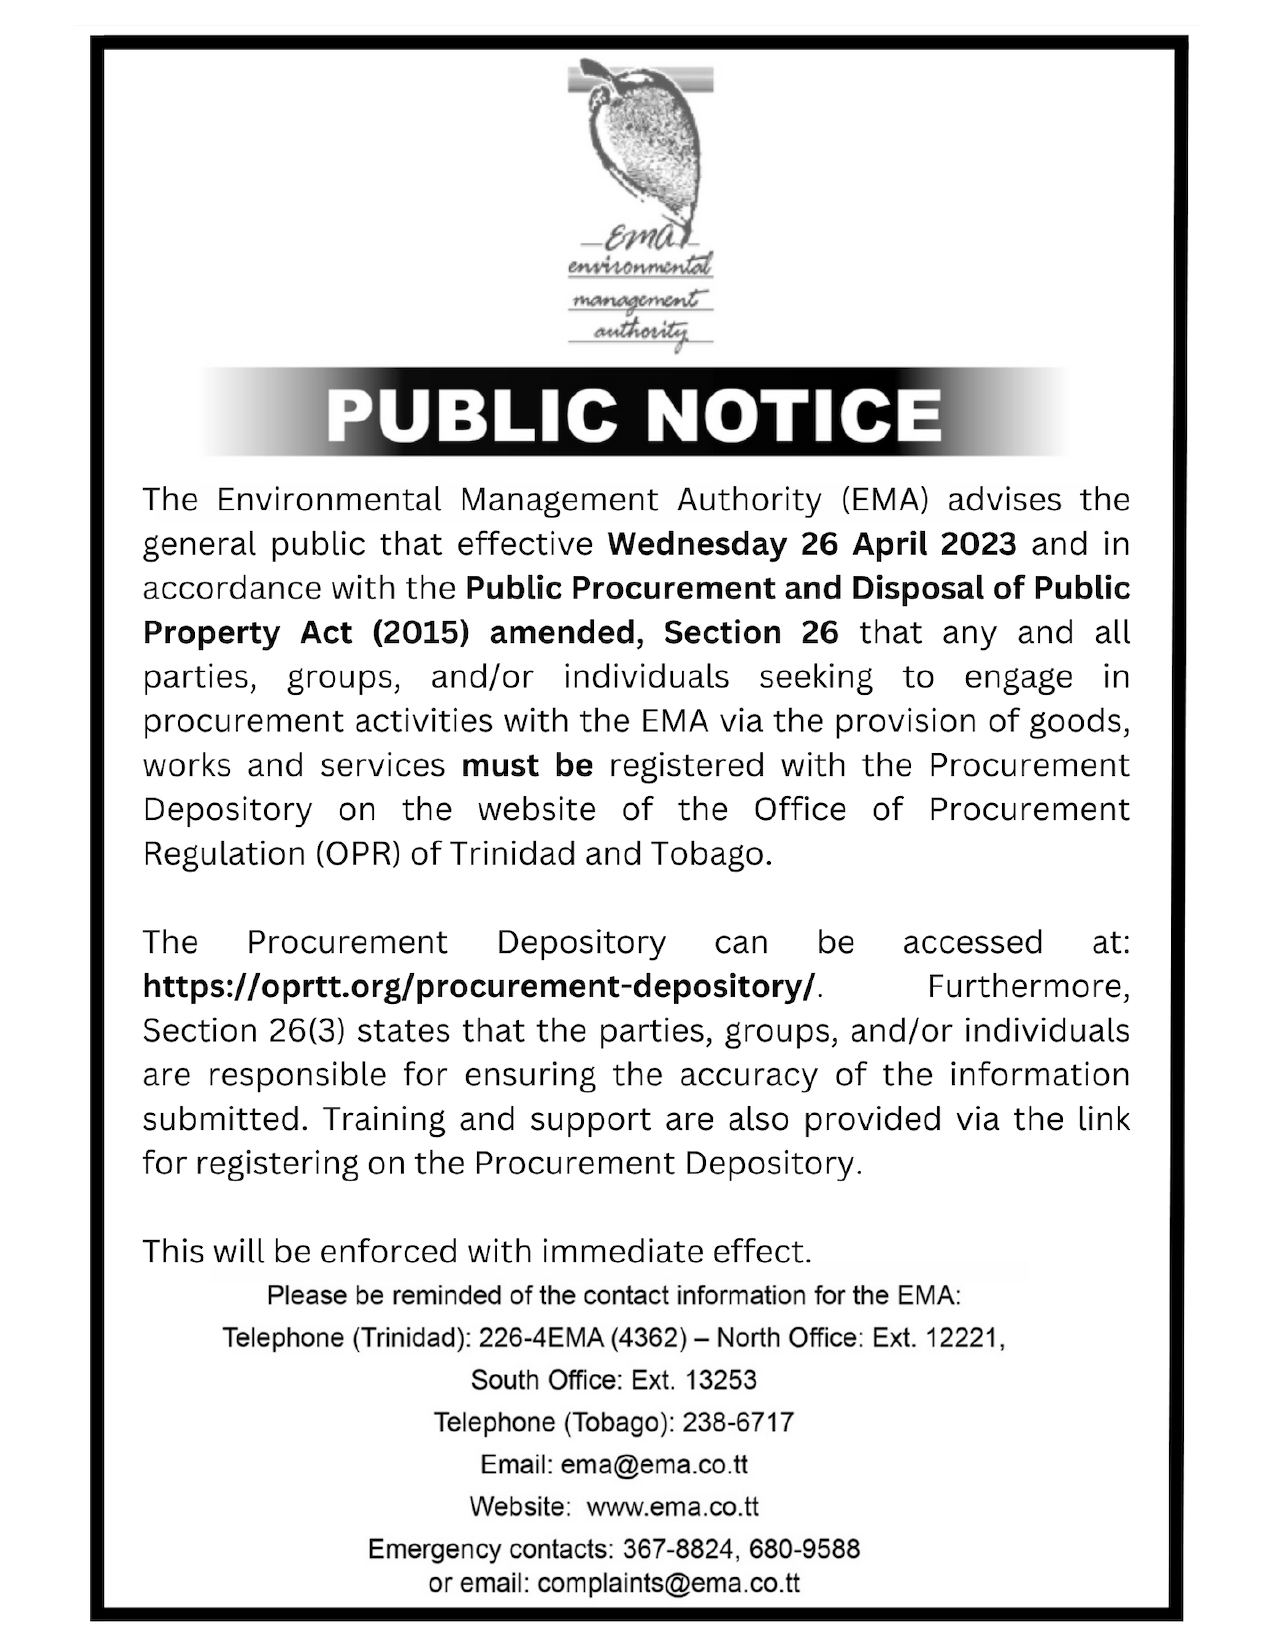 Publicnotice_pages-to-jpg-0001